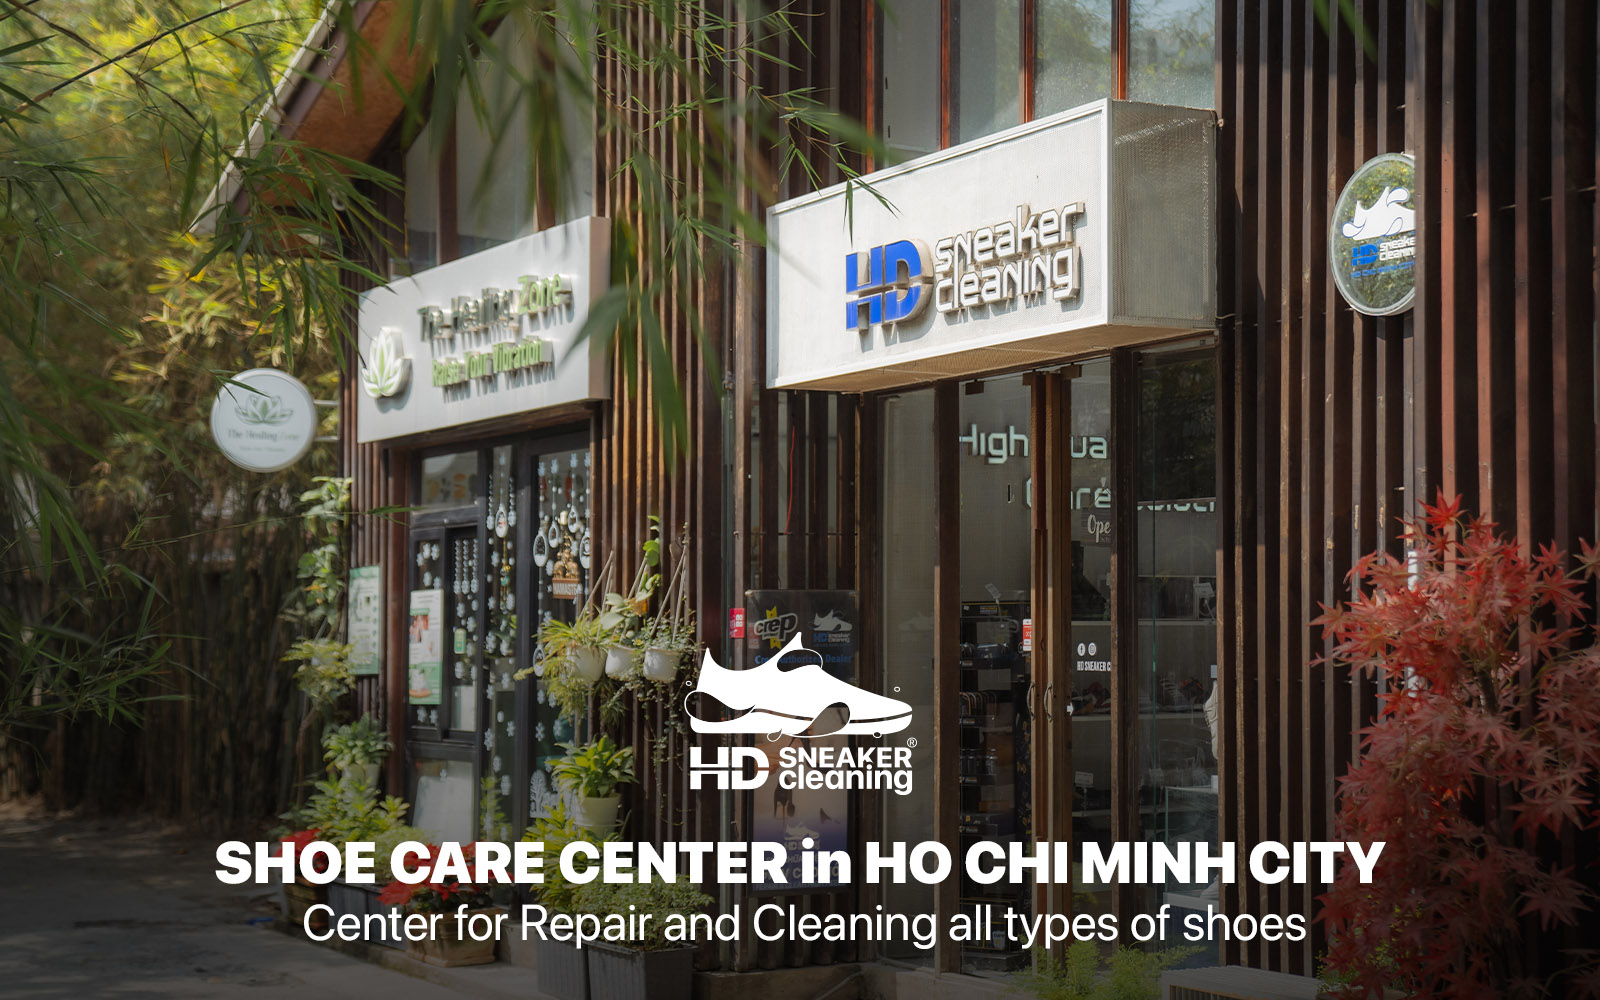 Shoe care center in Ho Chi Minh City